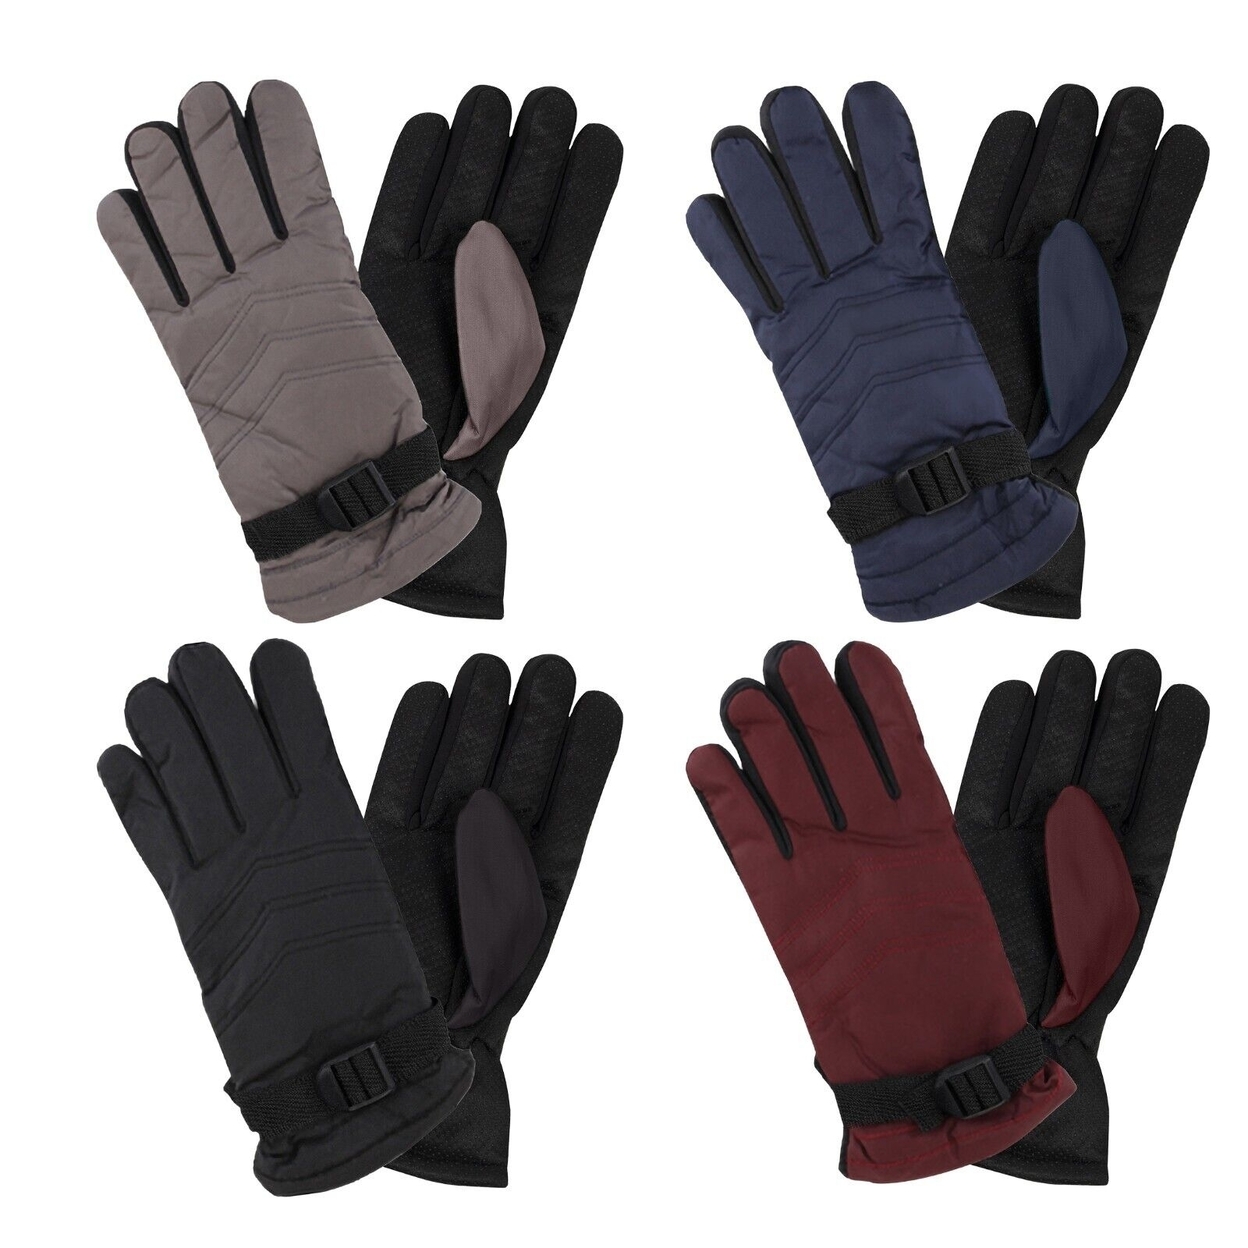 4-Pairs: Women's Cozy Fur Lined Snow Ski Warm Winter Gloves - Assorted